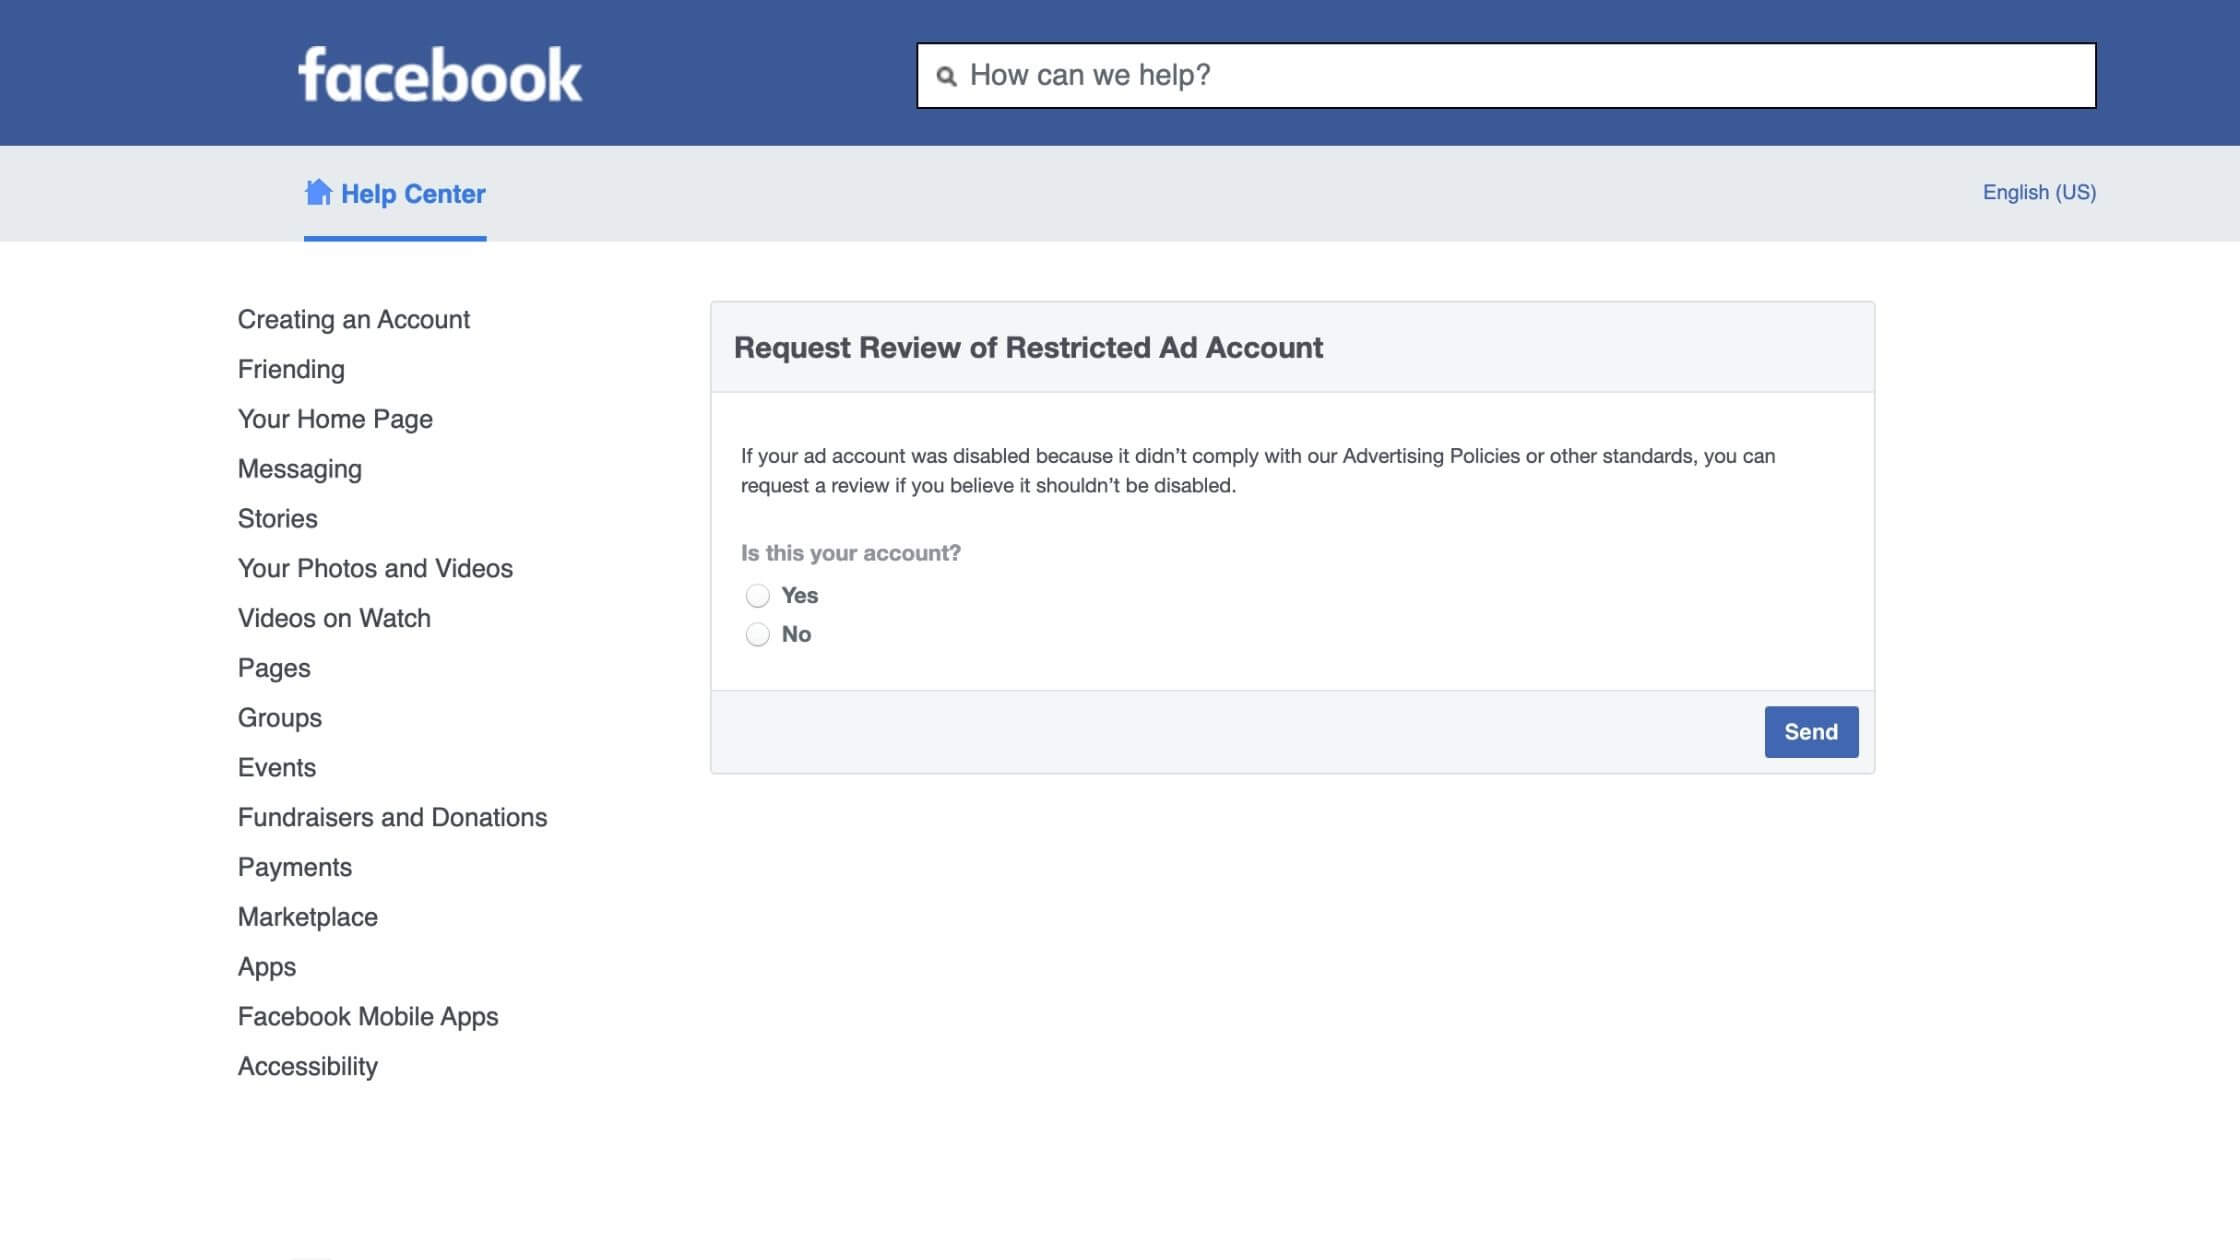 Facebook restricted ad account form